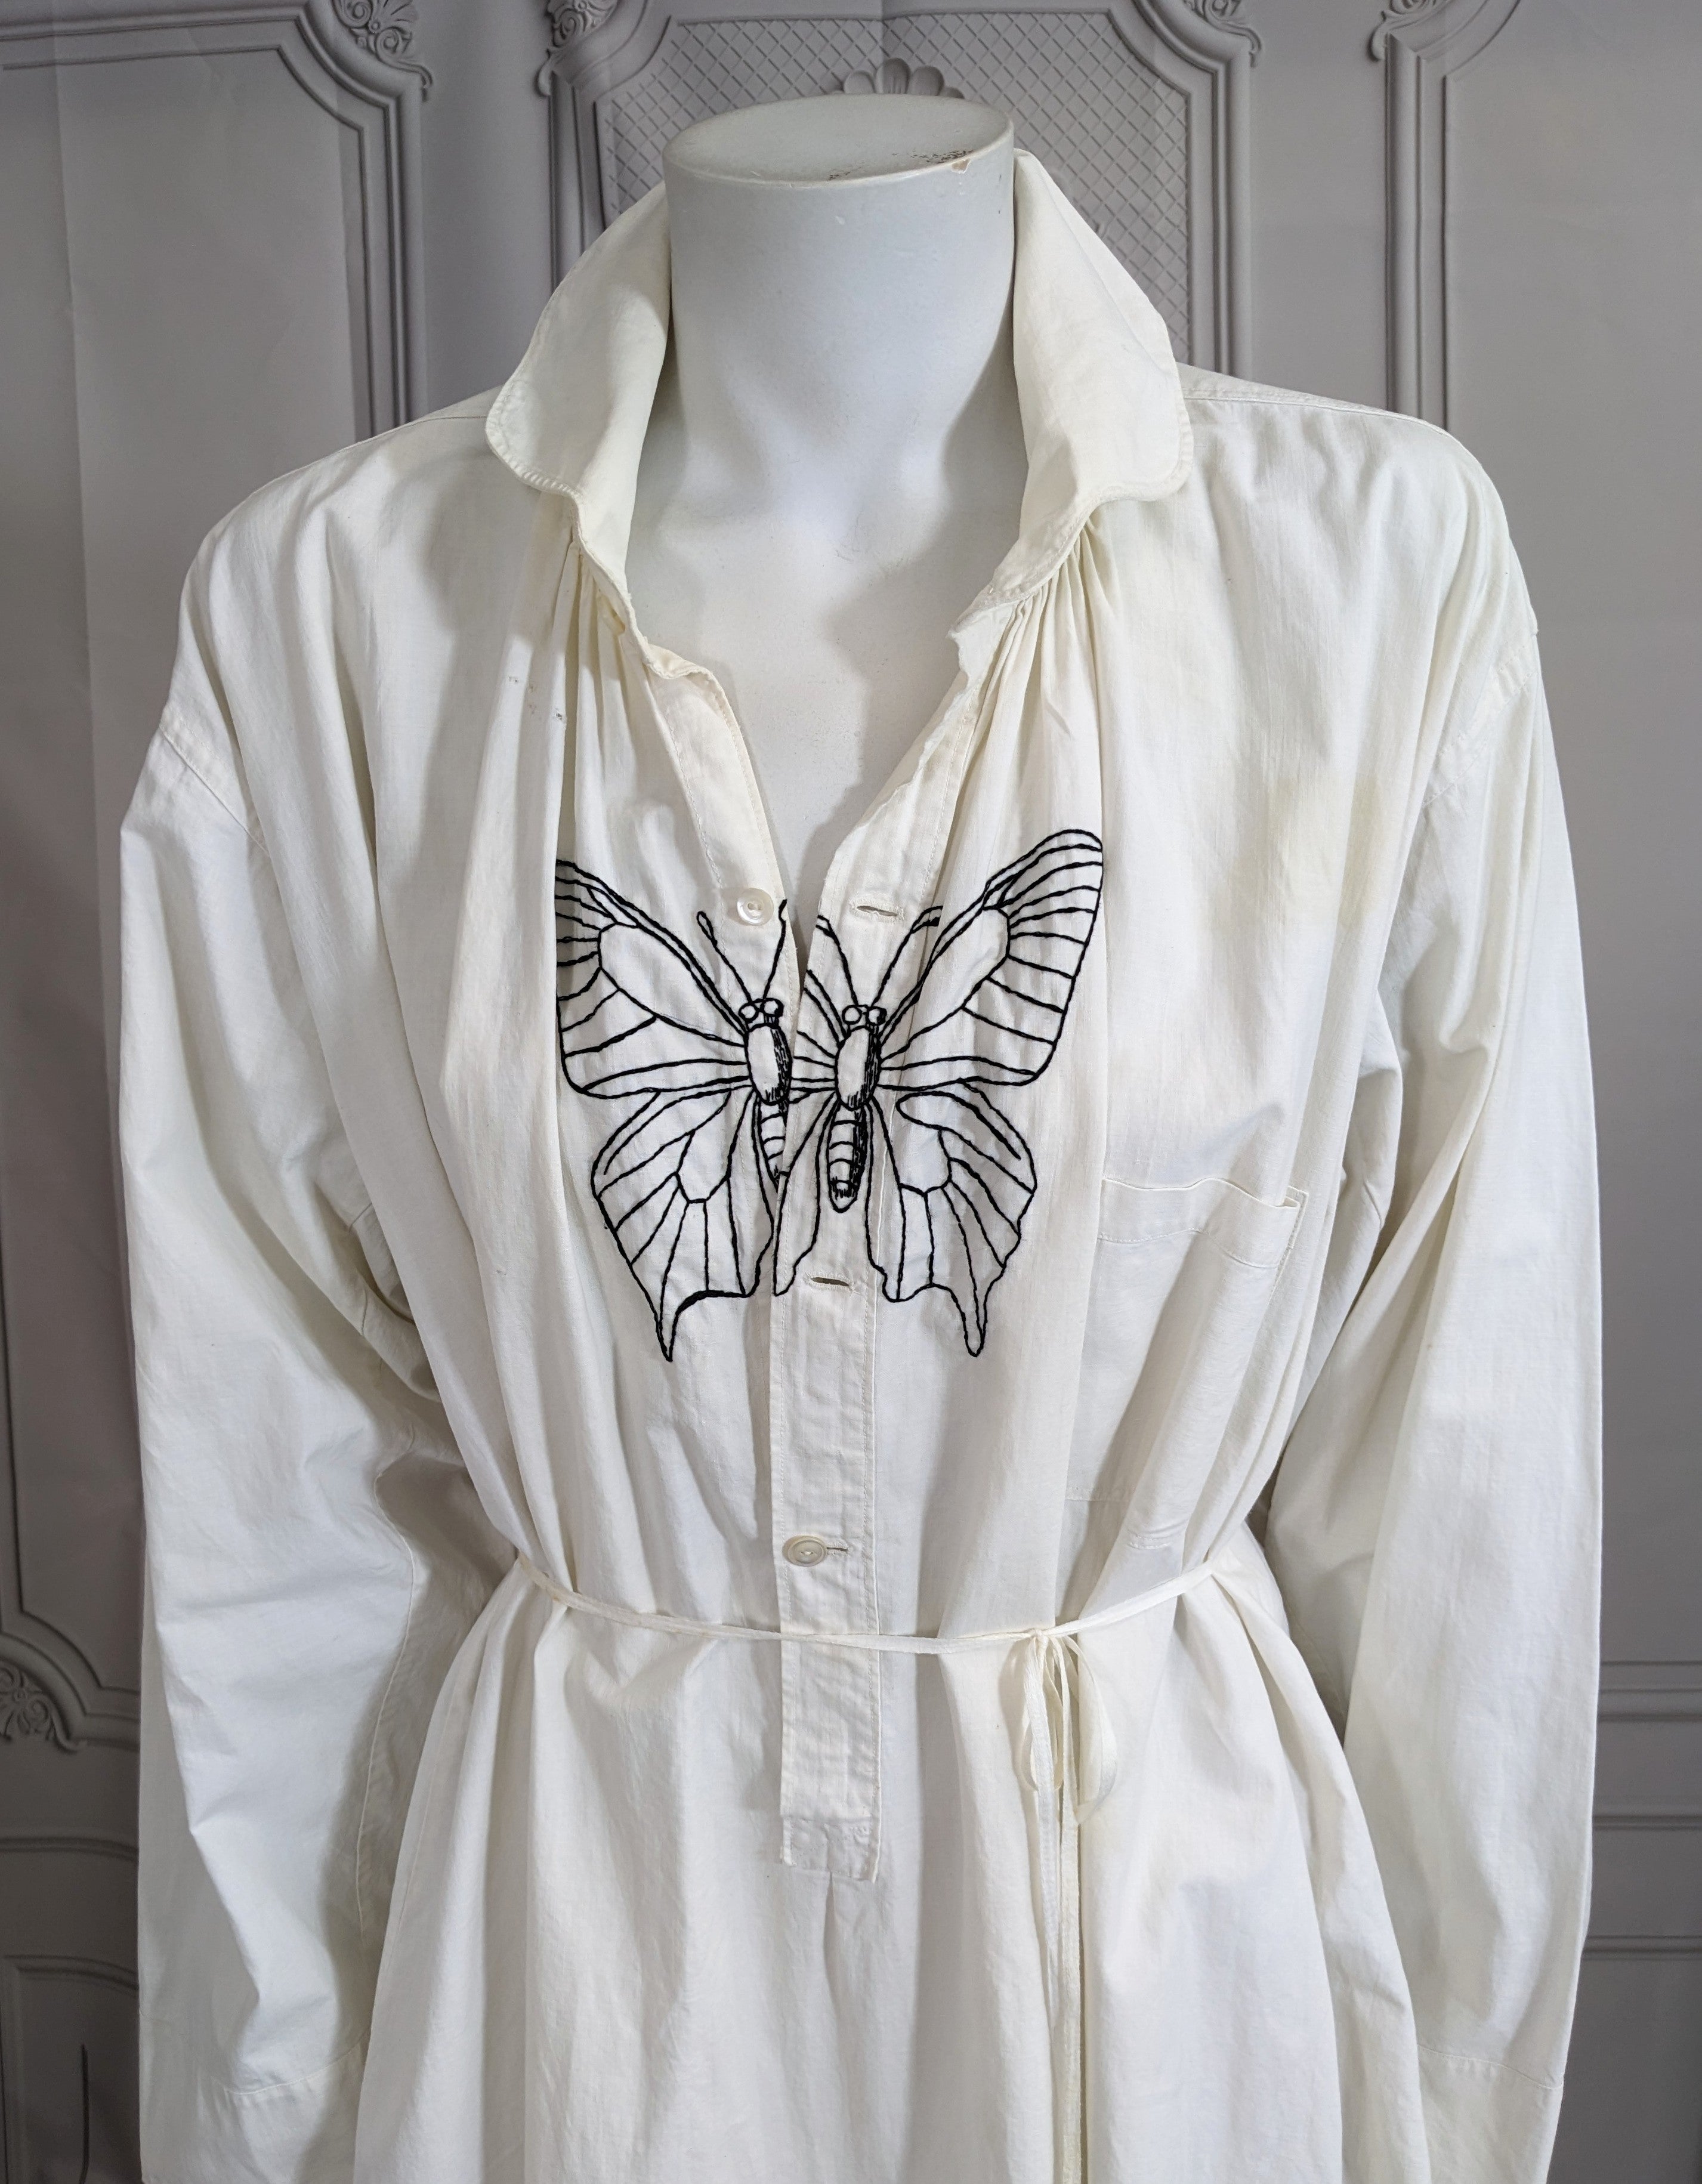 Upcycled Reembroidered Cotton dress from the early 1900's with contemporary embroidery by Studio VL. Hand embroidered in the US in graphic black. Doubled Mirror Butterfly motif on placket and NY's finest mascot on left cuff. French 1900's cotton